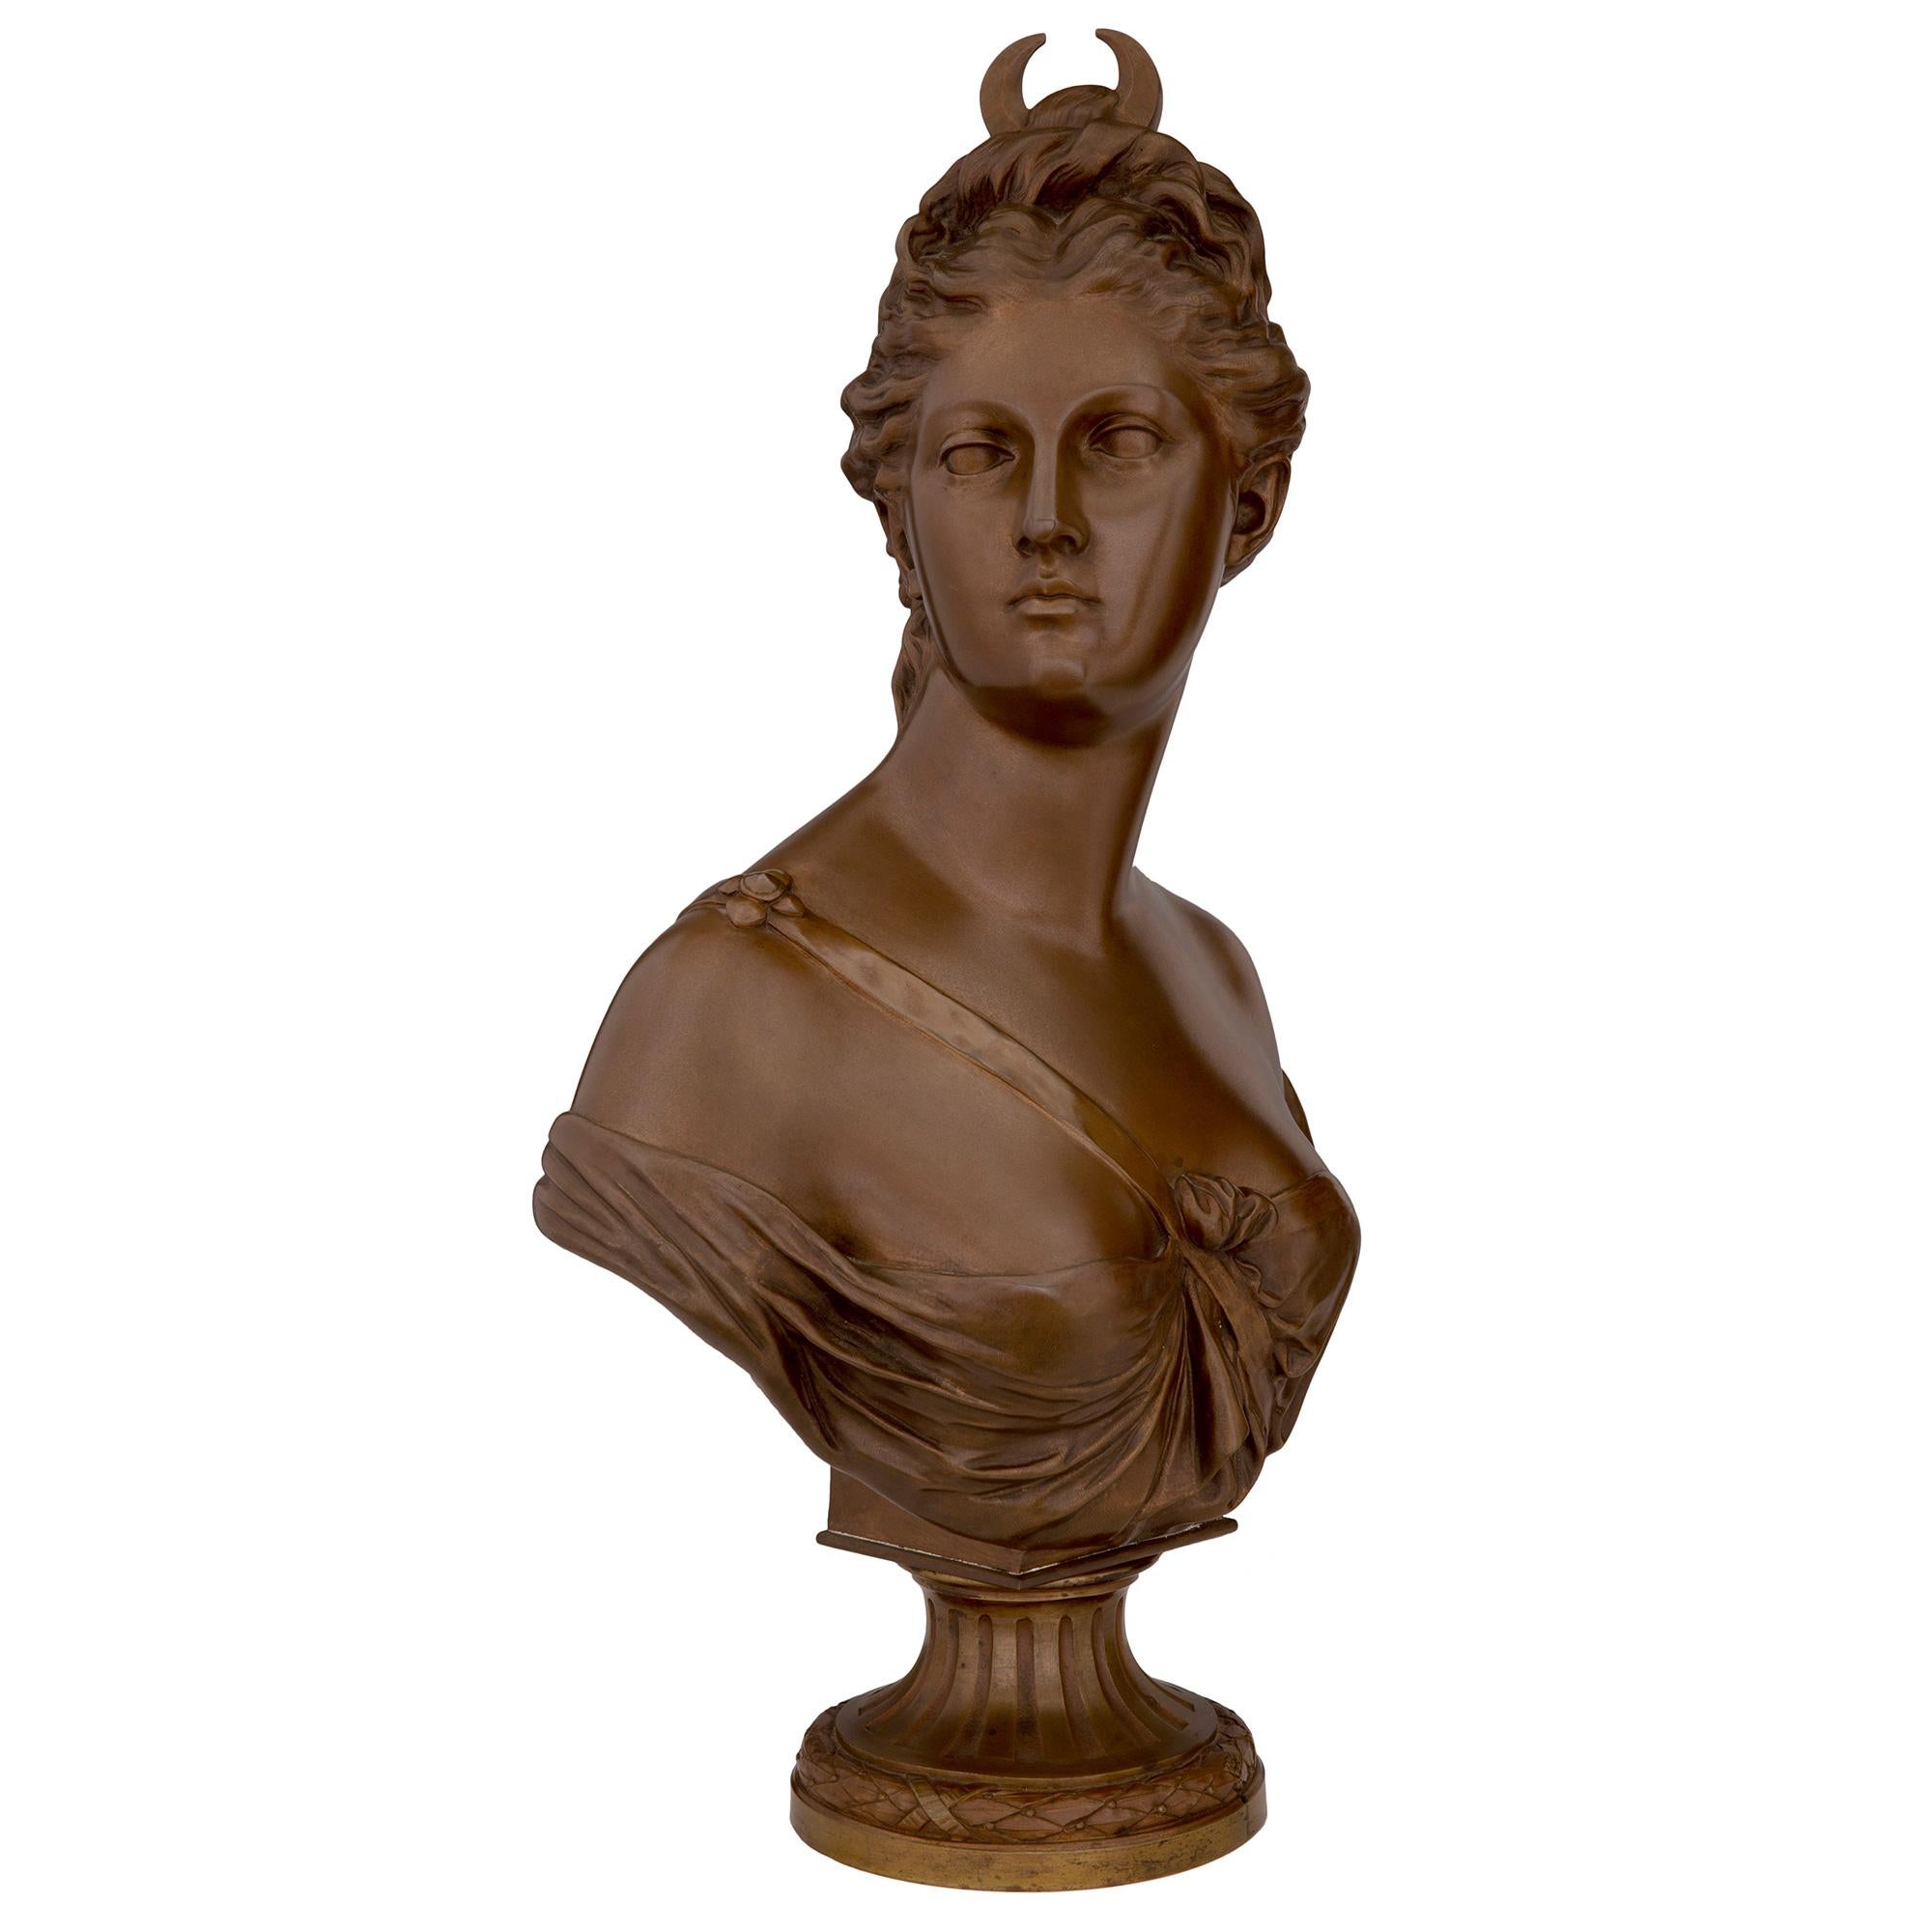 A superb French mid 19th century Louis XVI st. patinated bronze bust of Diana the Huntress, signed HOUDON and SUSSE Frères. The bust is raised by a circular base with a fine wrap around berried laurel band and fluted socle support. Above is the